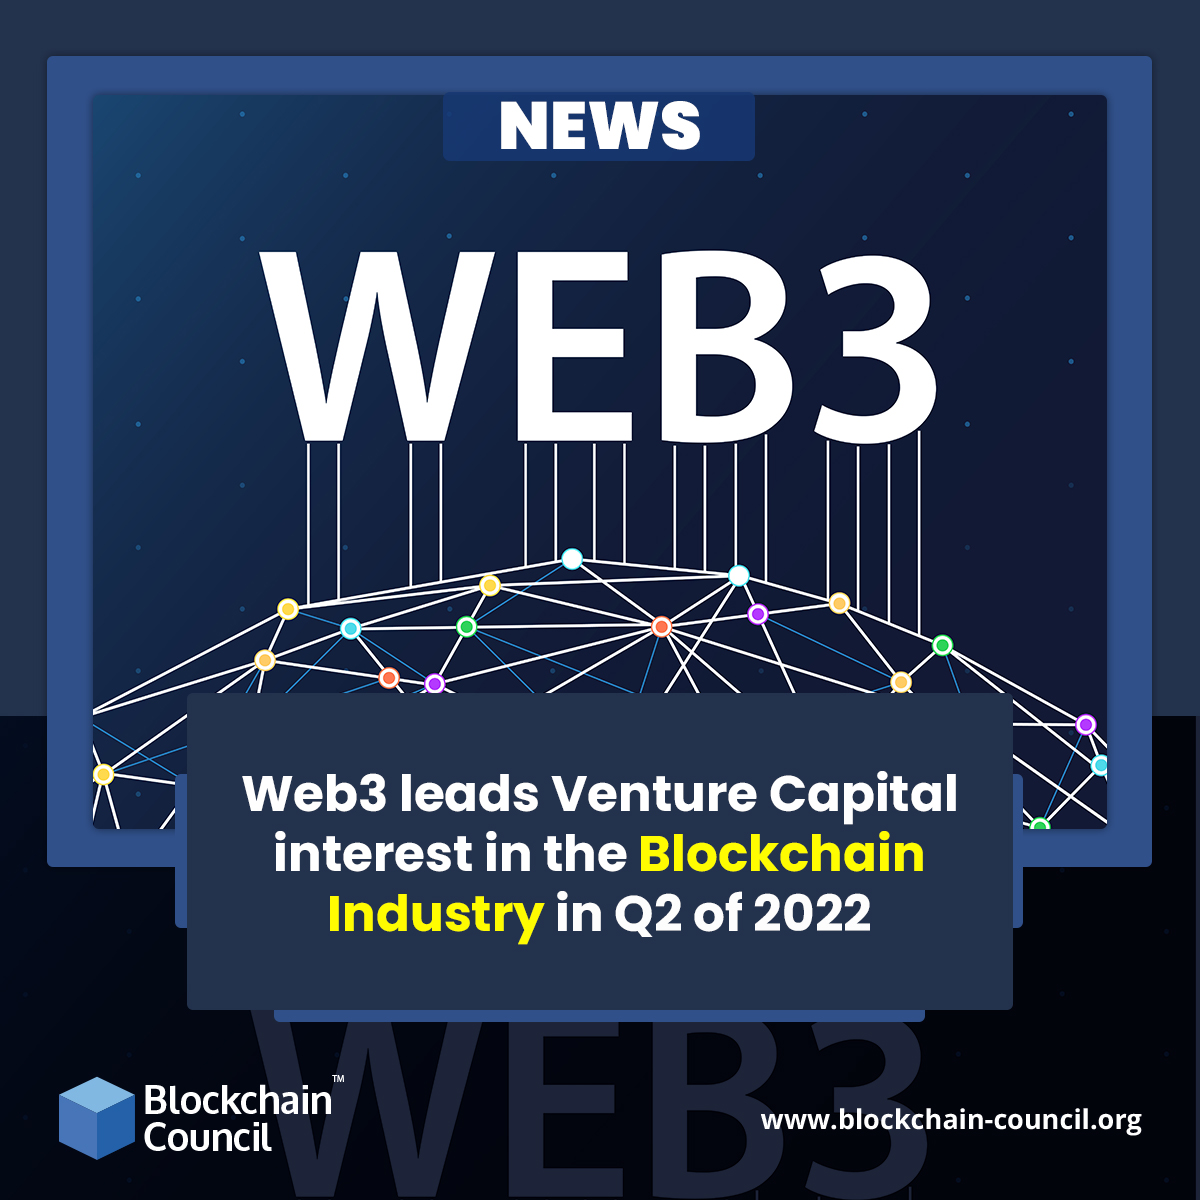 Web3 leads Venture Capital interest in the Blockchain Industry in Q2 of 2022